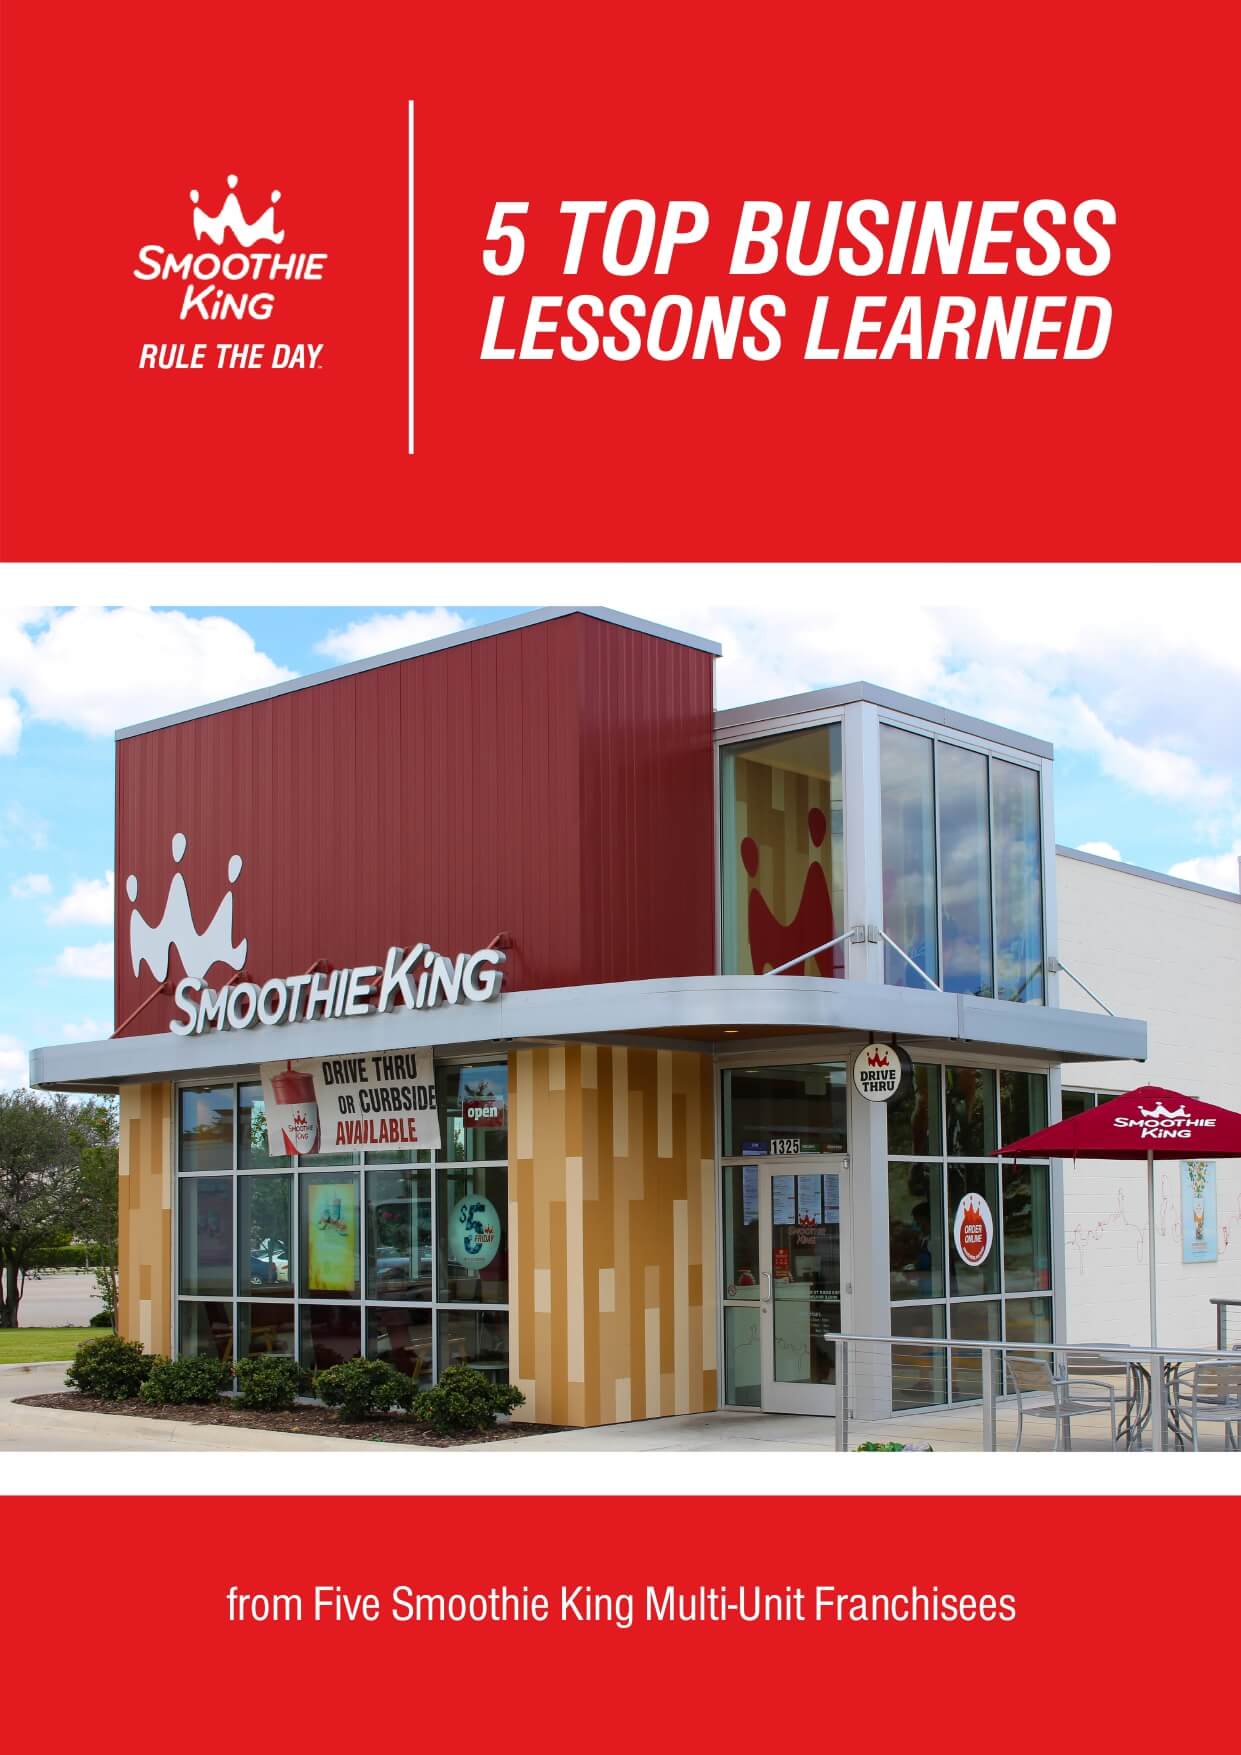 5 top business lessons learned from the Smoothie King franchise